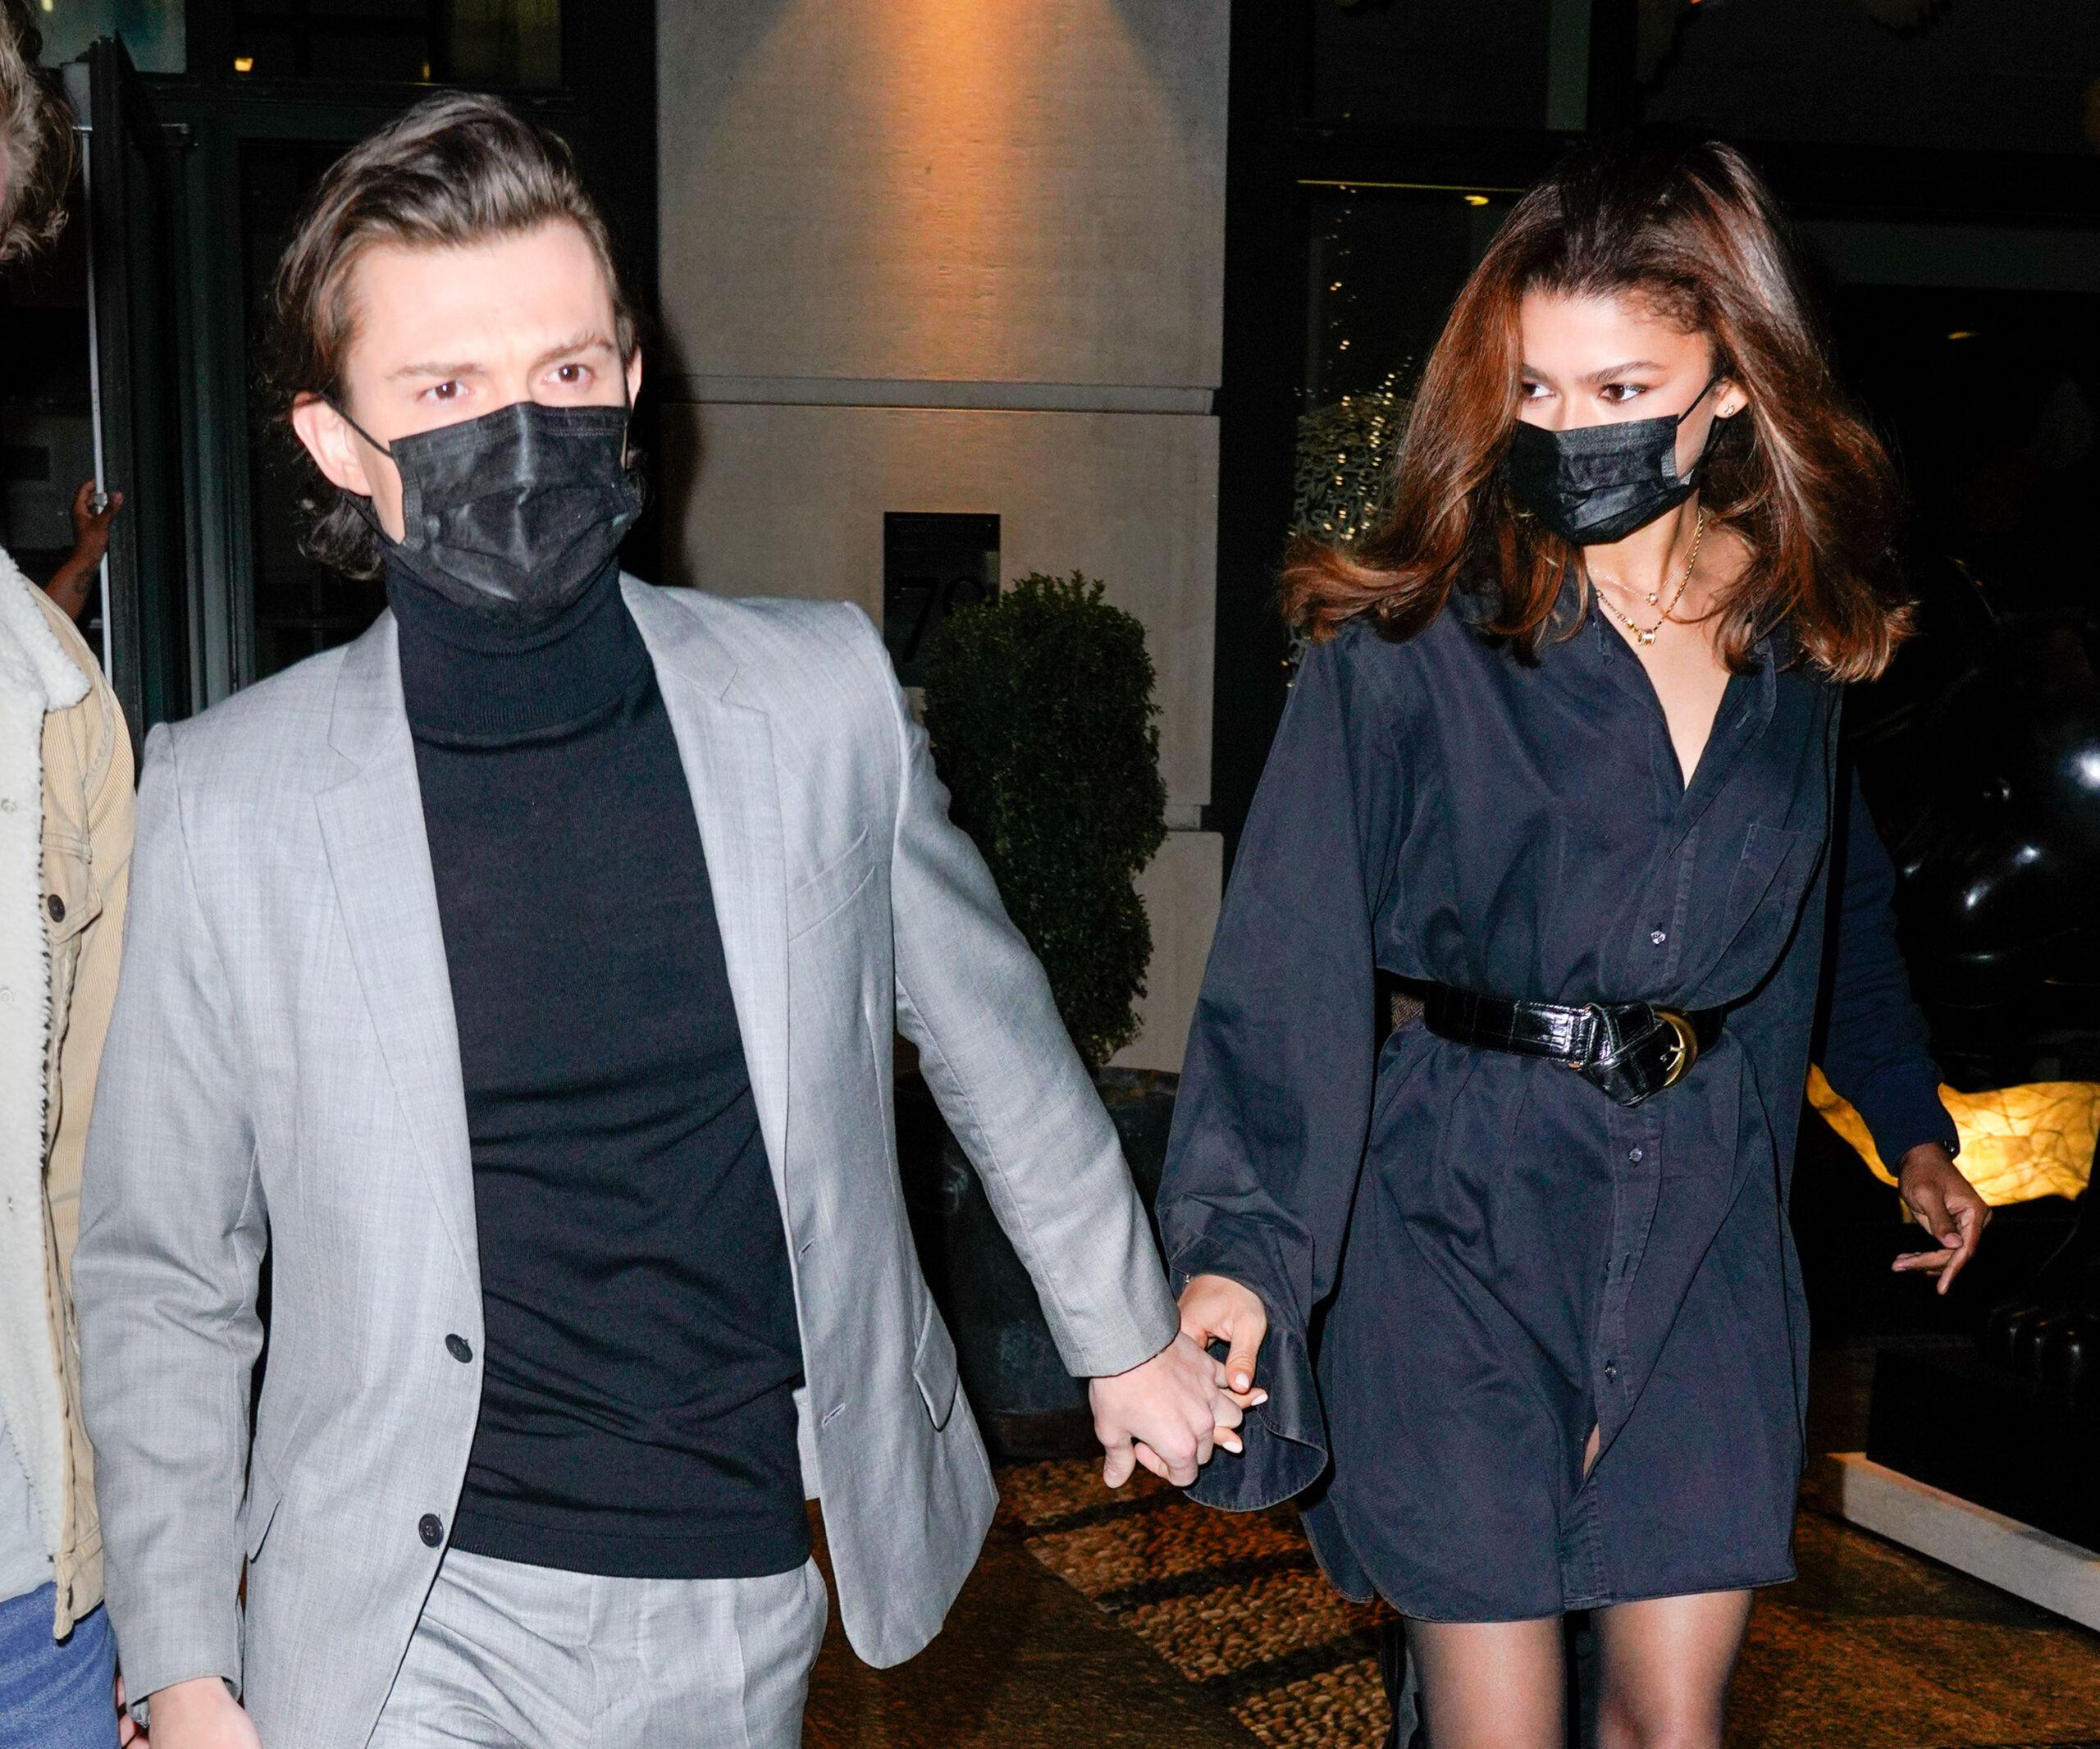 Tom Holland and Zendaya hold hands when exiting their hotel in New York